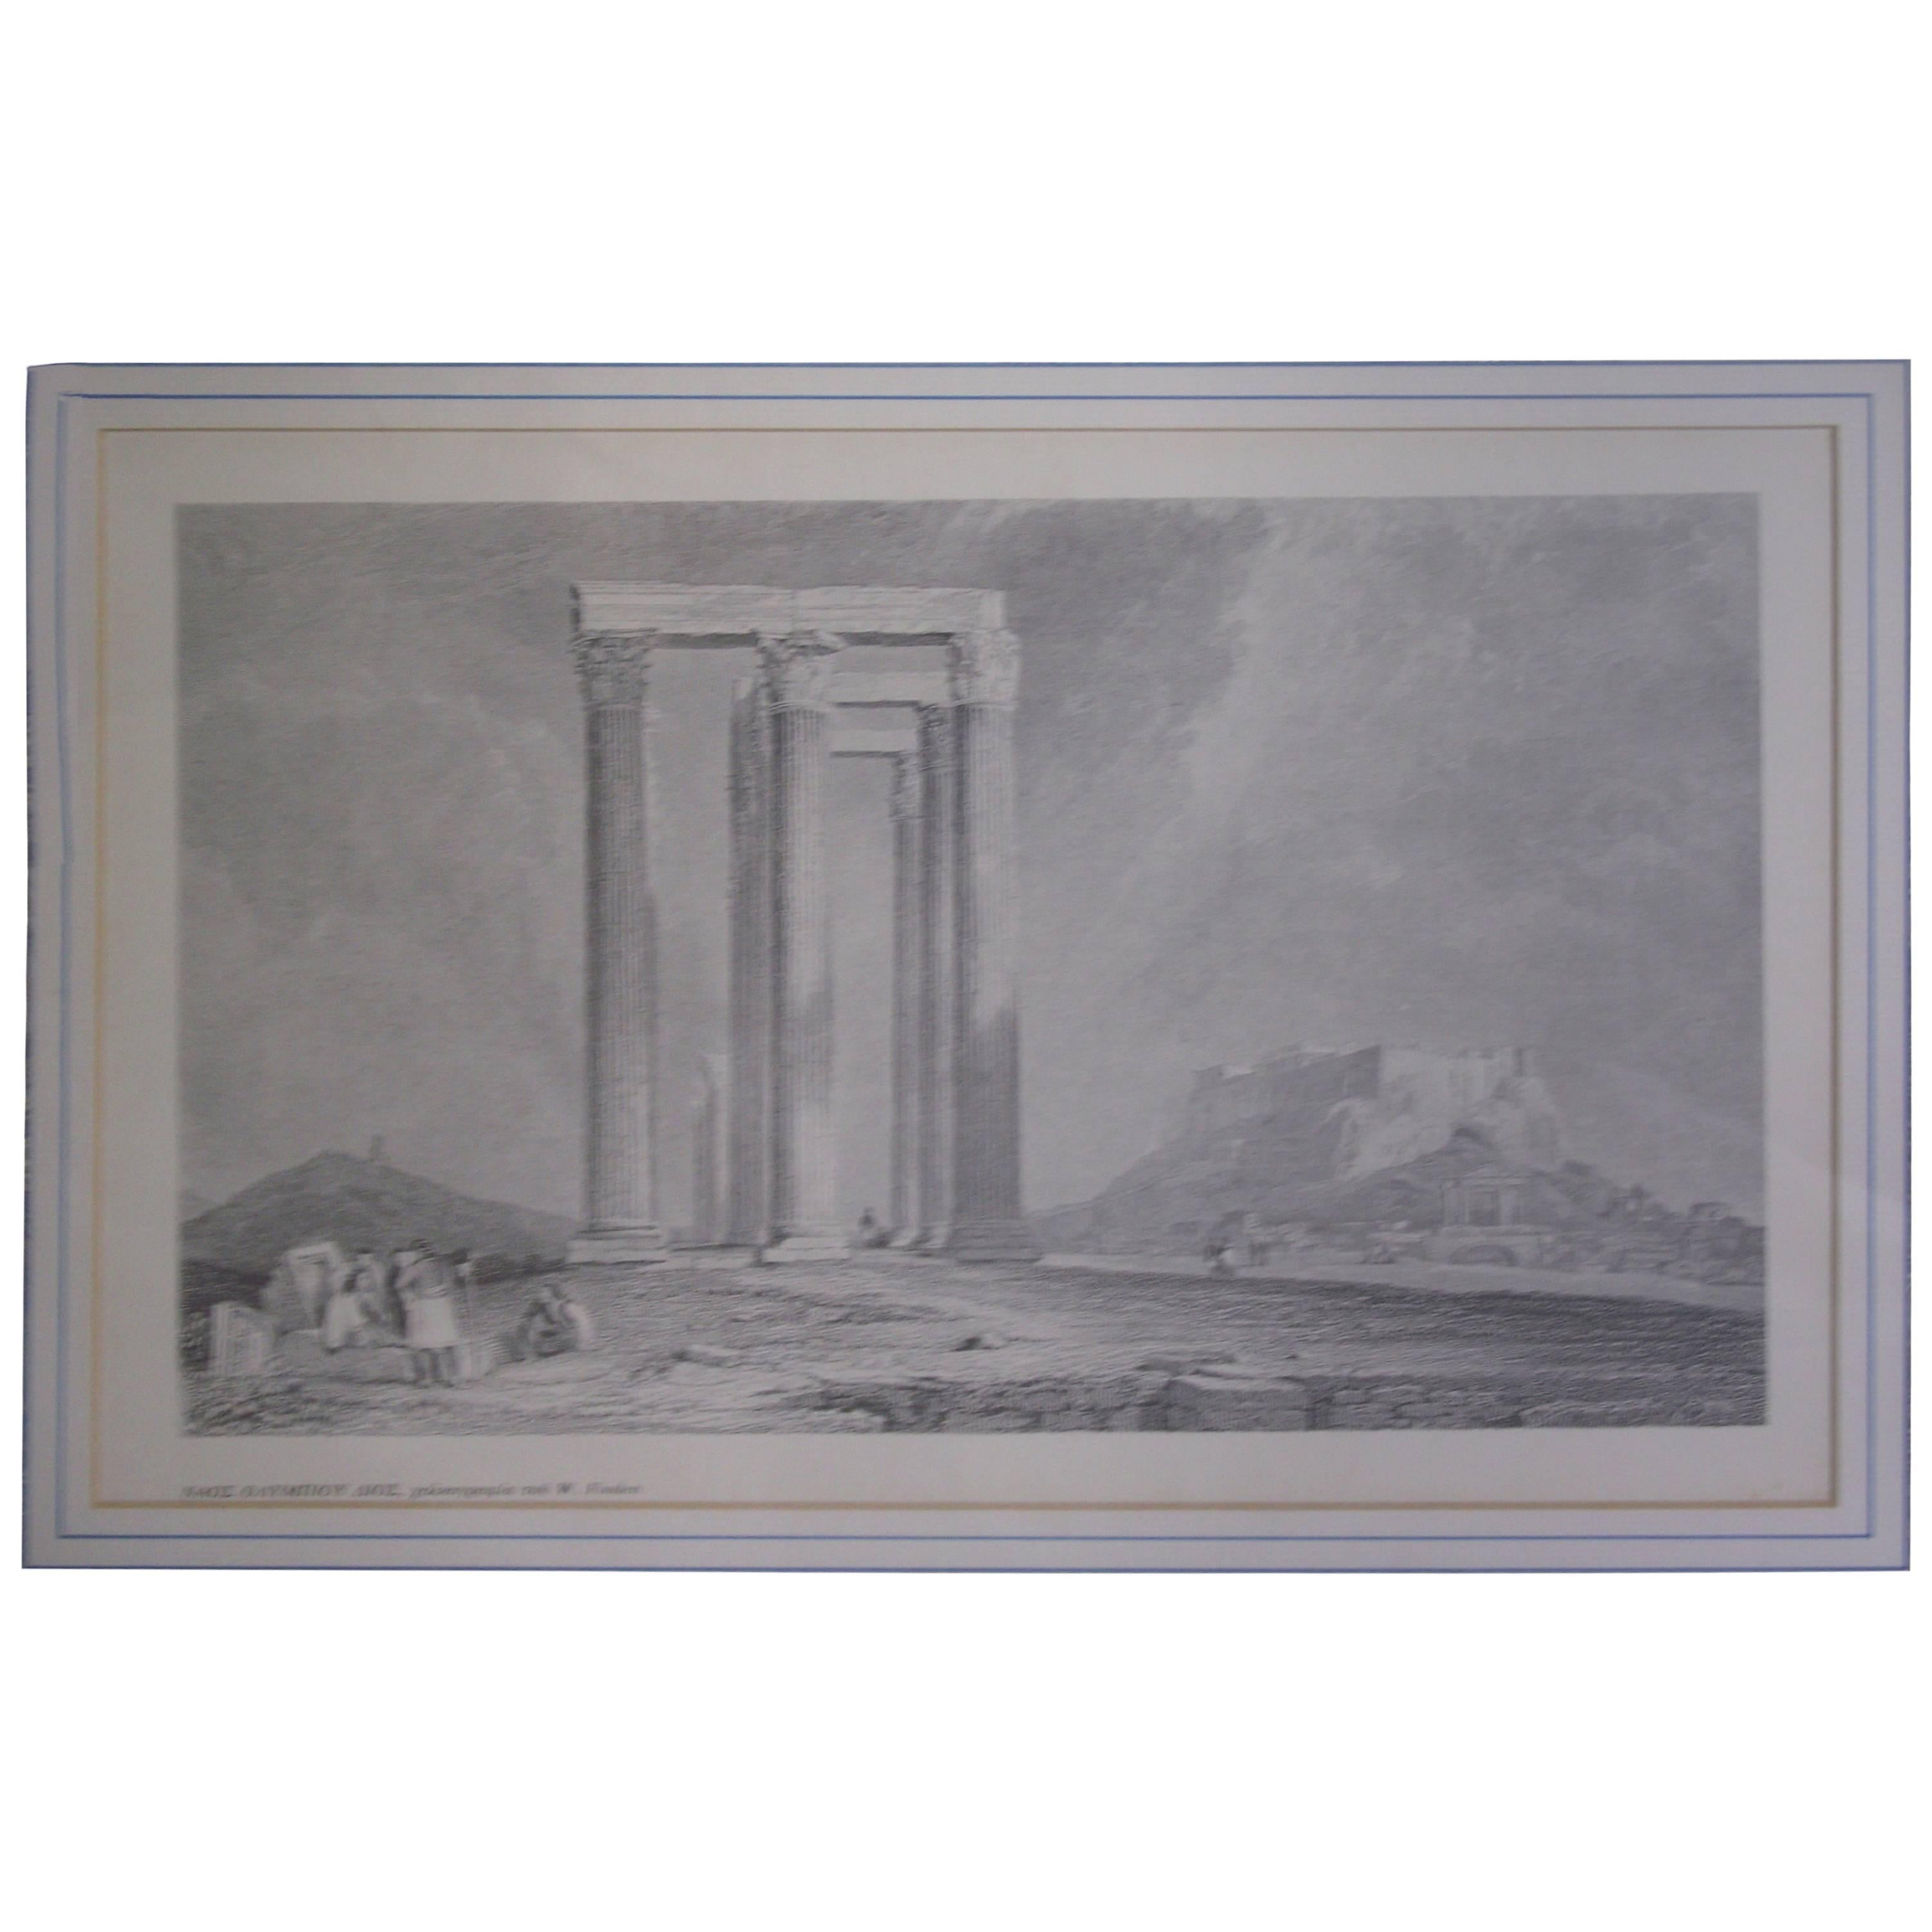 Beautiful print by Edward Francis Finden (1791-1857). Still in its beautiful original mat and burl wood finished frame.

Edward Francis Finden was a well know English engraver. His work was very popular in the mid-19th century.